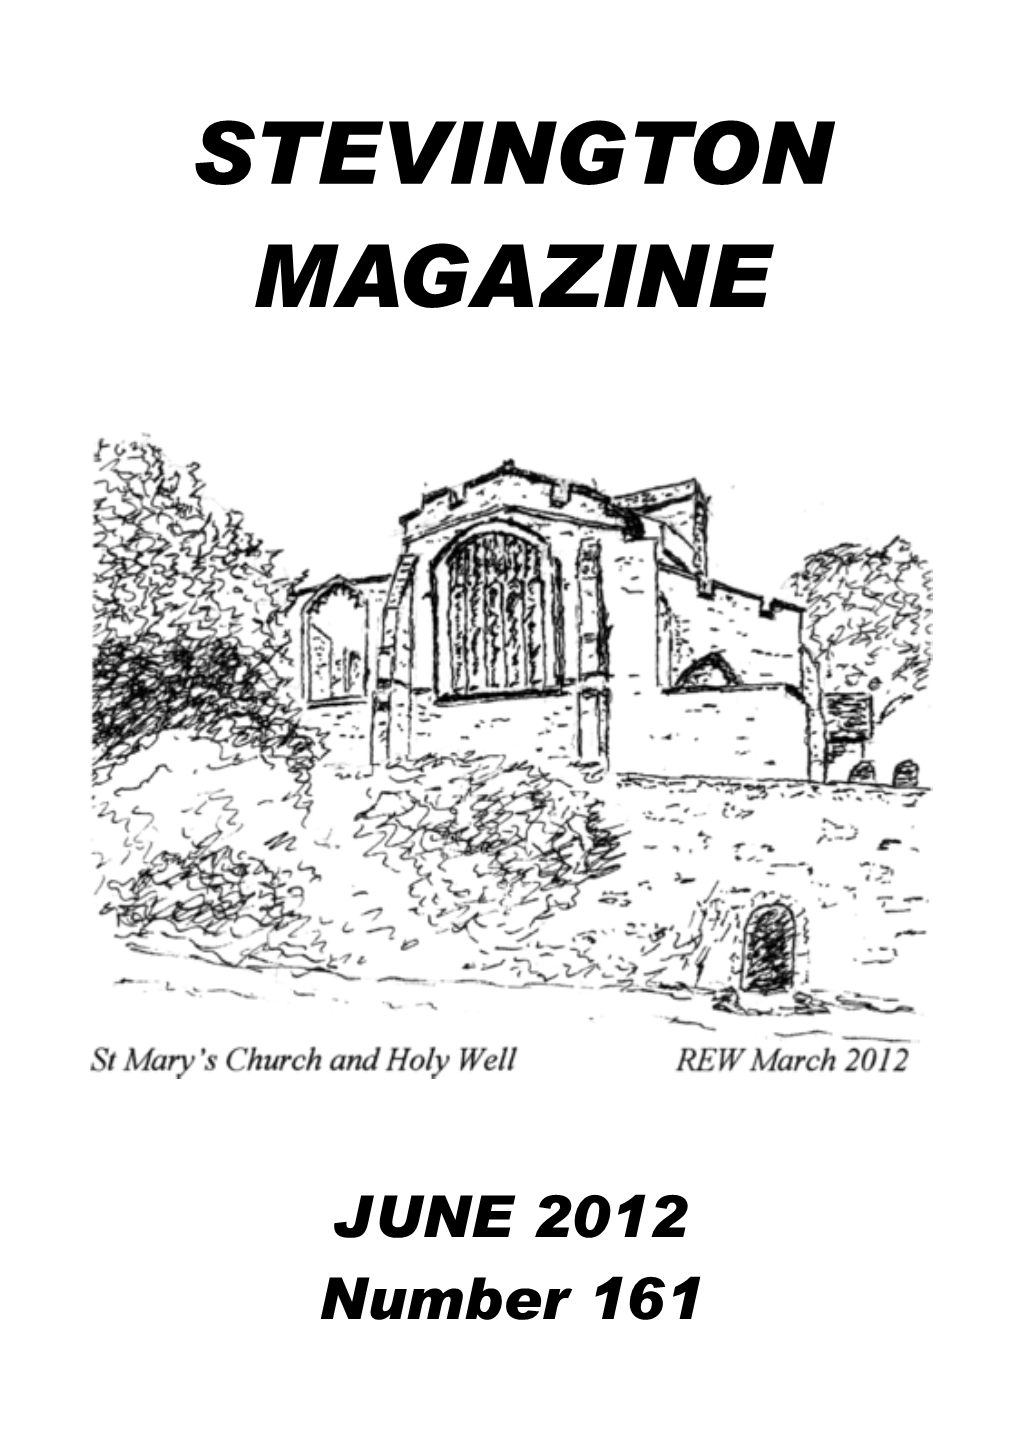 JUNE 2012 Number 161 VILLAGE DIARY May 28 Planning Committee Re Dane Hill Farm Traveller Site